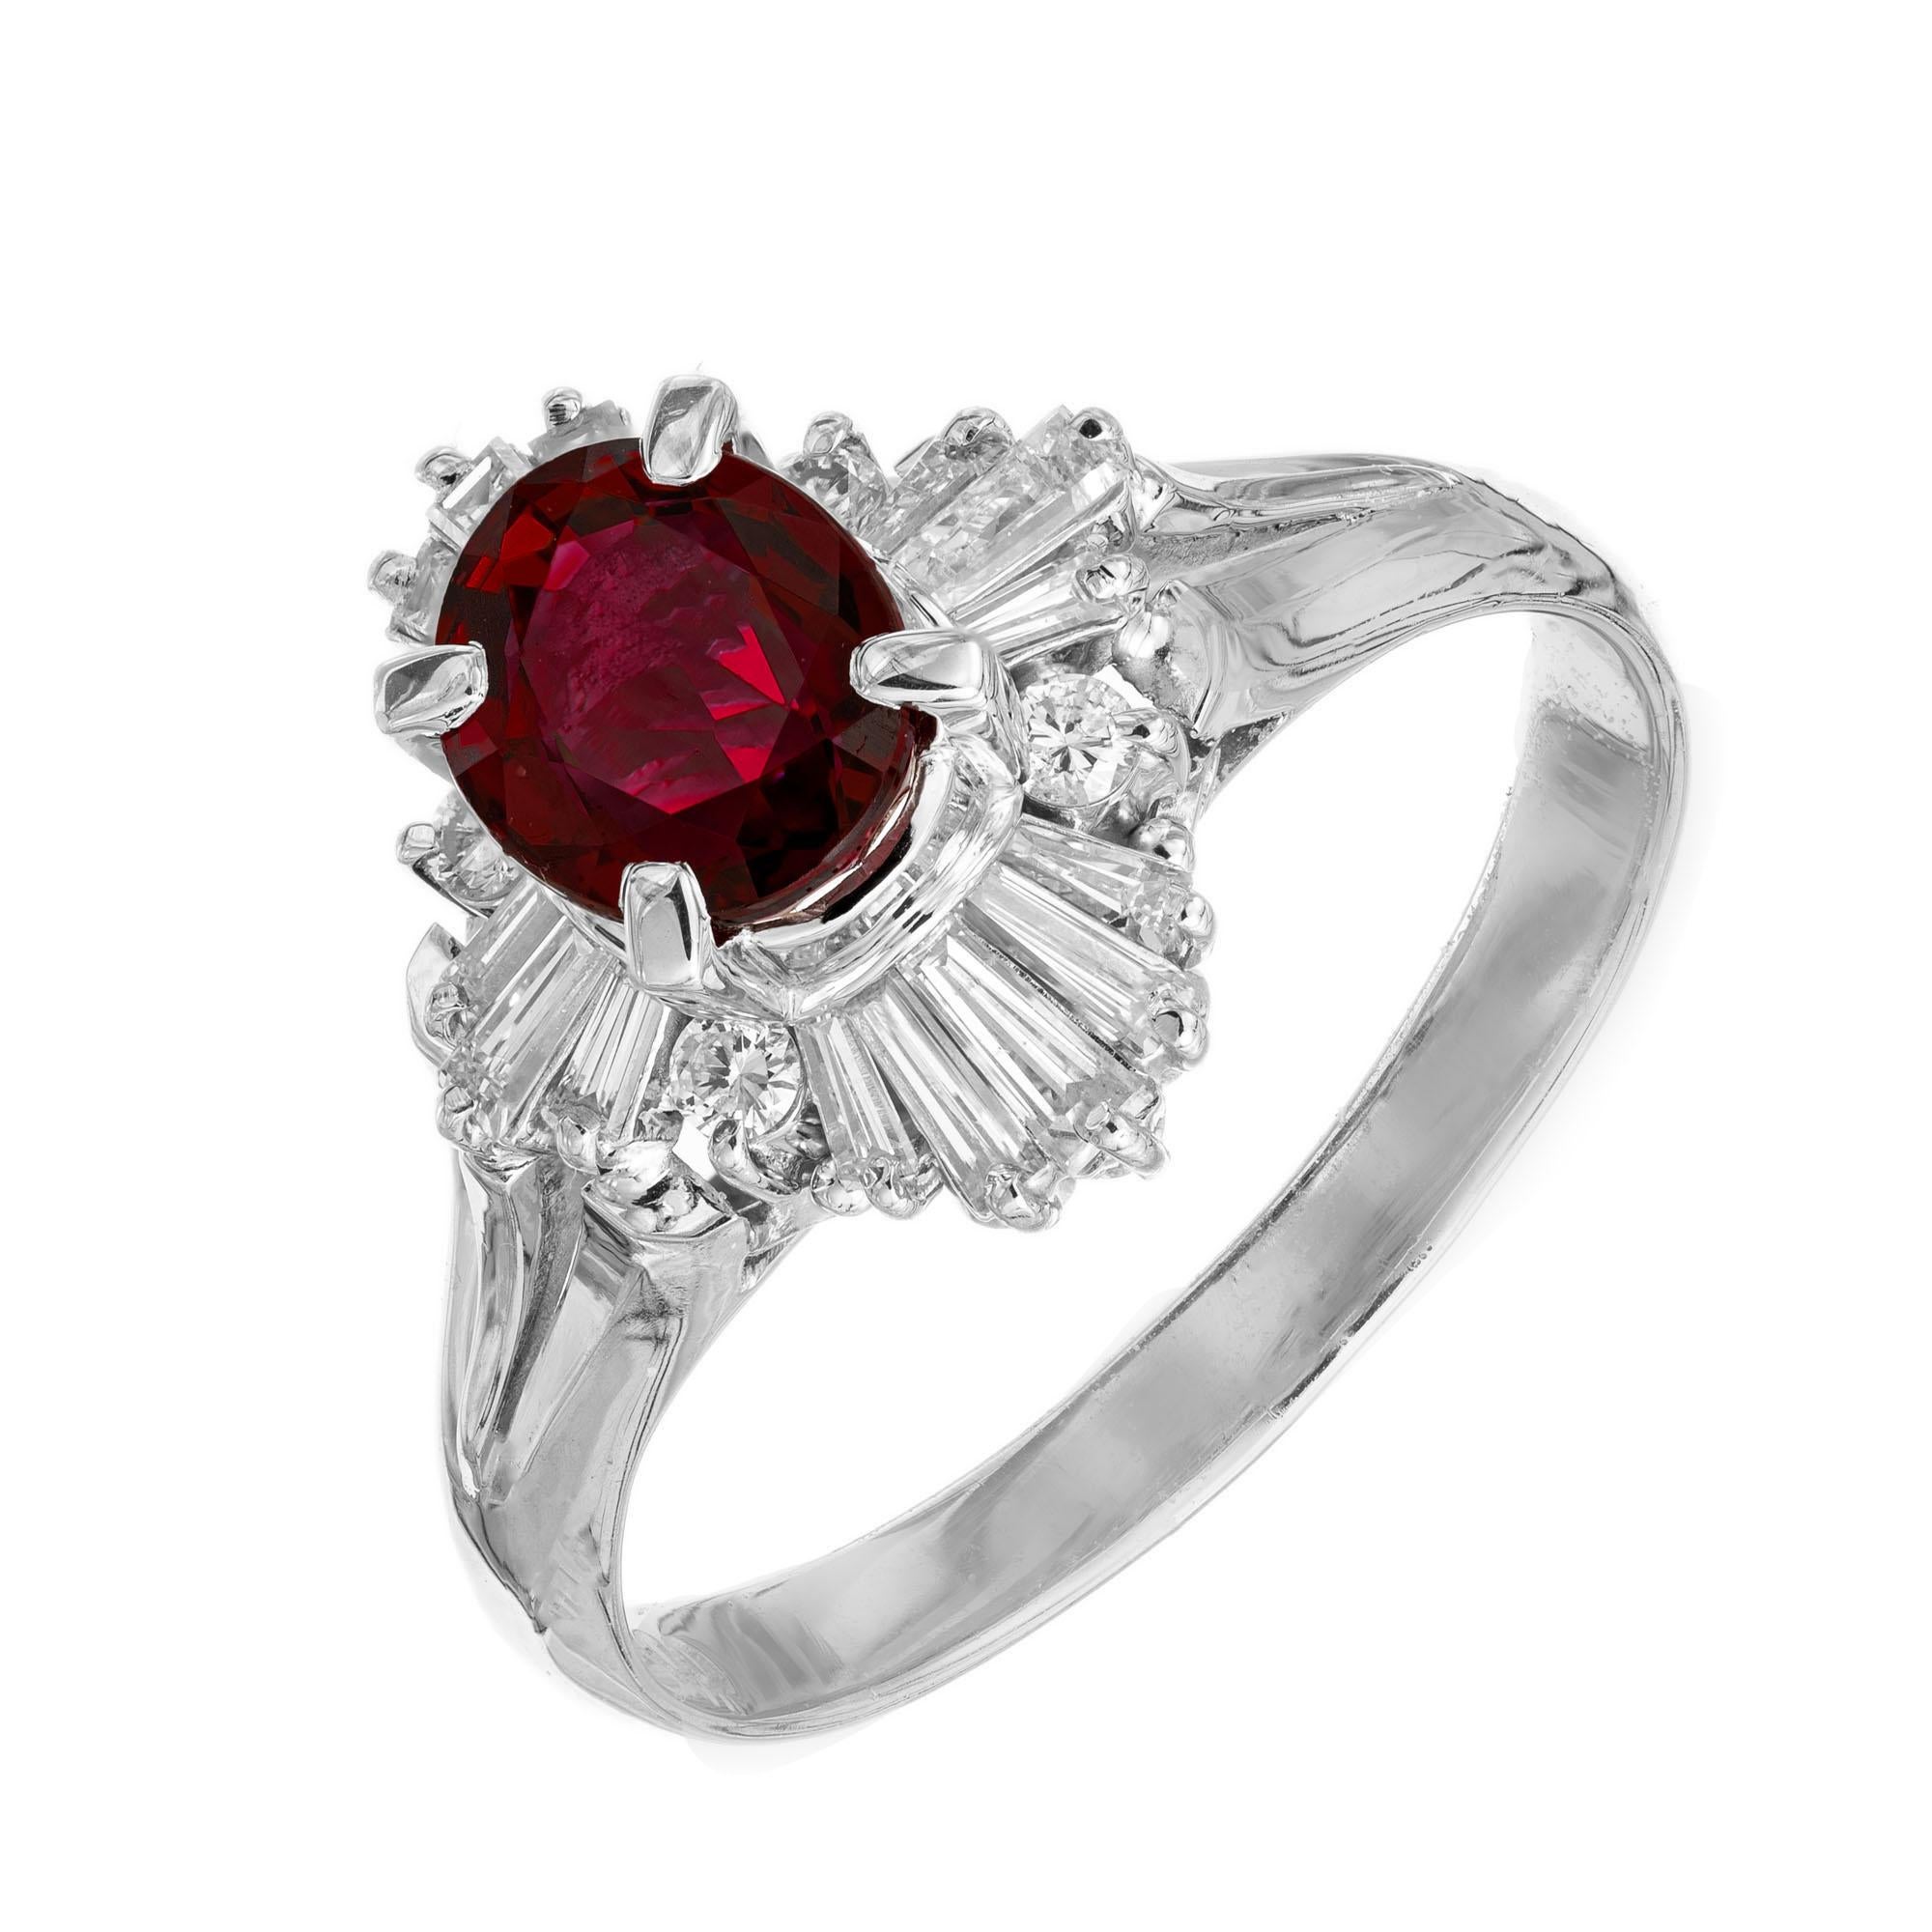 Ruby and diamond ring. GIA certified center stone with a halo of round and baguette diamonds in a handmade platinum setting. 

1 oval red ruby, SI approx. .95ct GIA Certificate # 2211312051
16 baguette diamonds, G-H SI approx. 
4 round brilliant cut